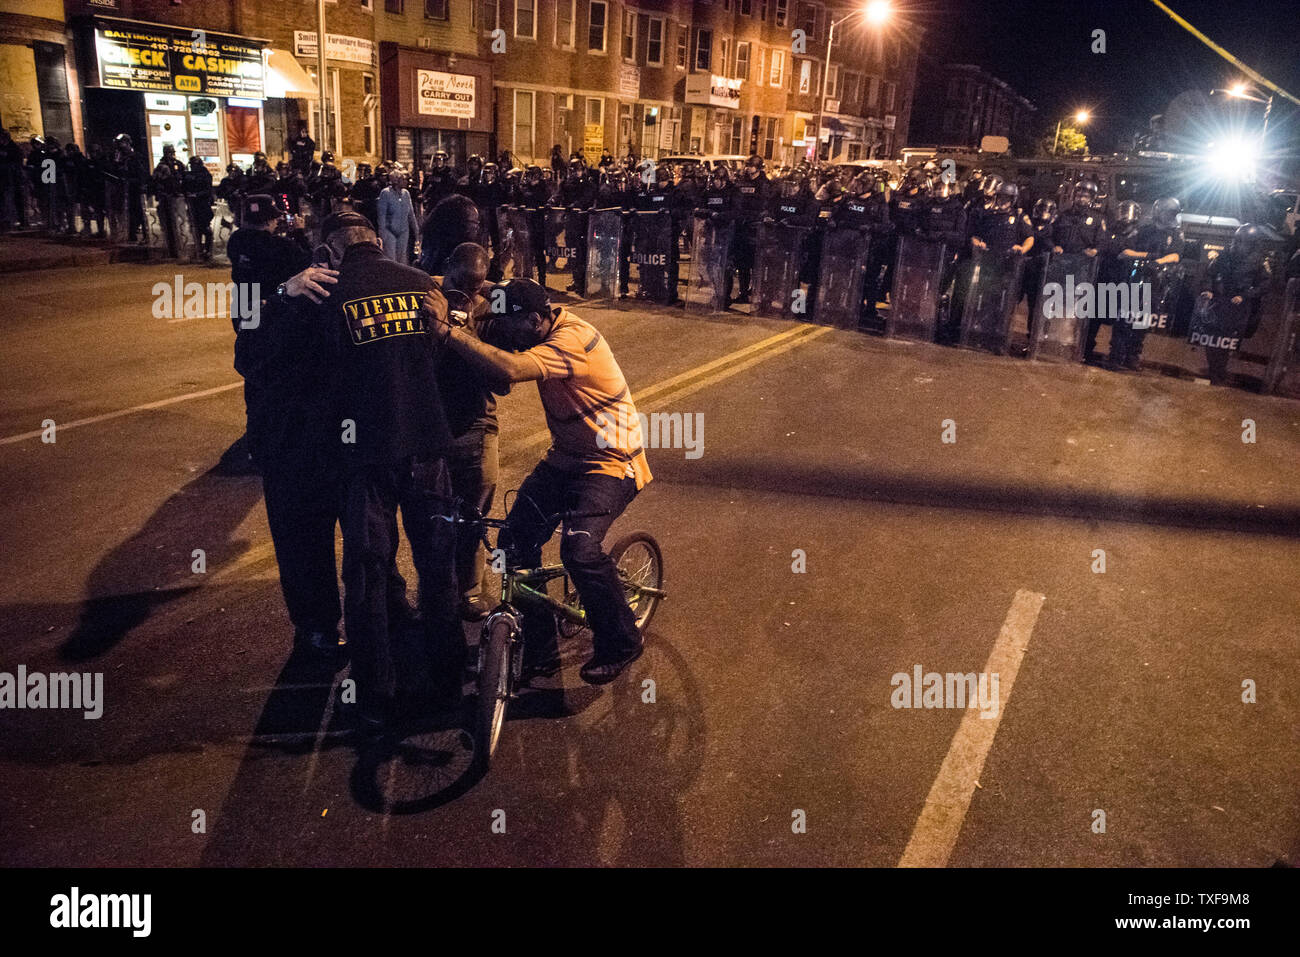 Local citizens gather and pray during demonstrations in Baltimore as the 10pm curfew grew closer in Baltimore, Maryland on April 28, 2015.  Protests have erupted after death of Freddie Gray.    Photo by Ken Cedeno/UPI. Stock Photo